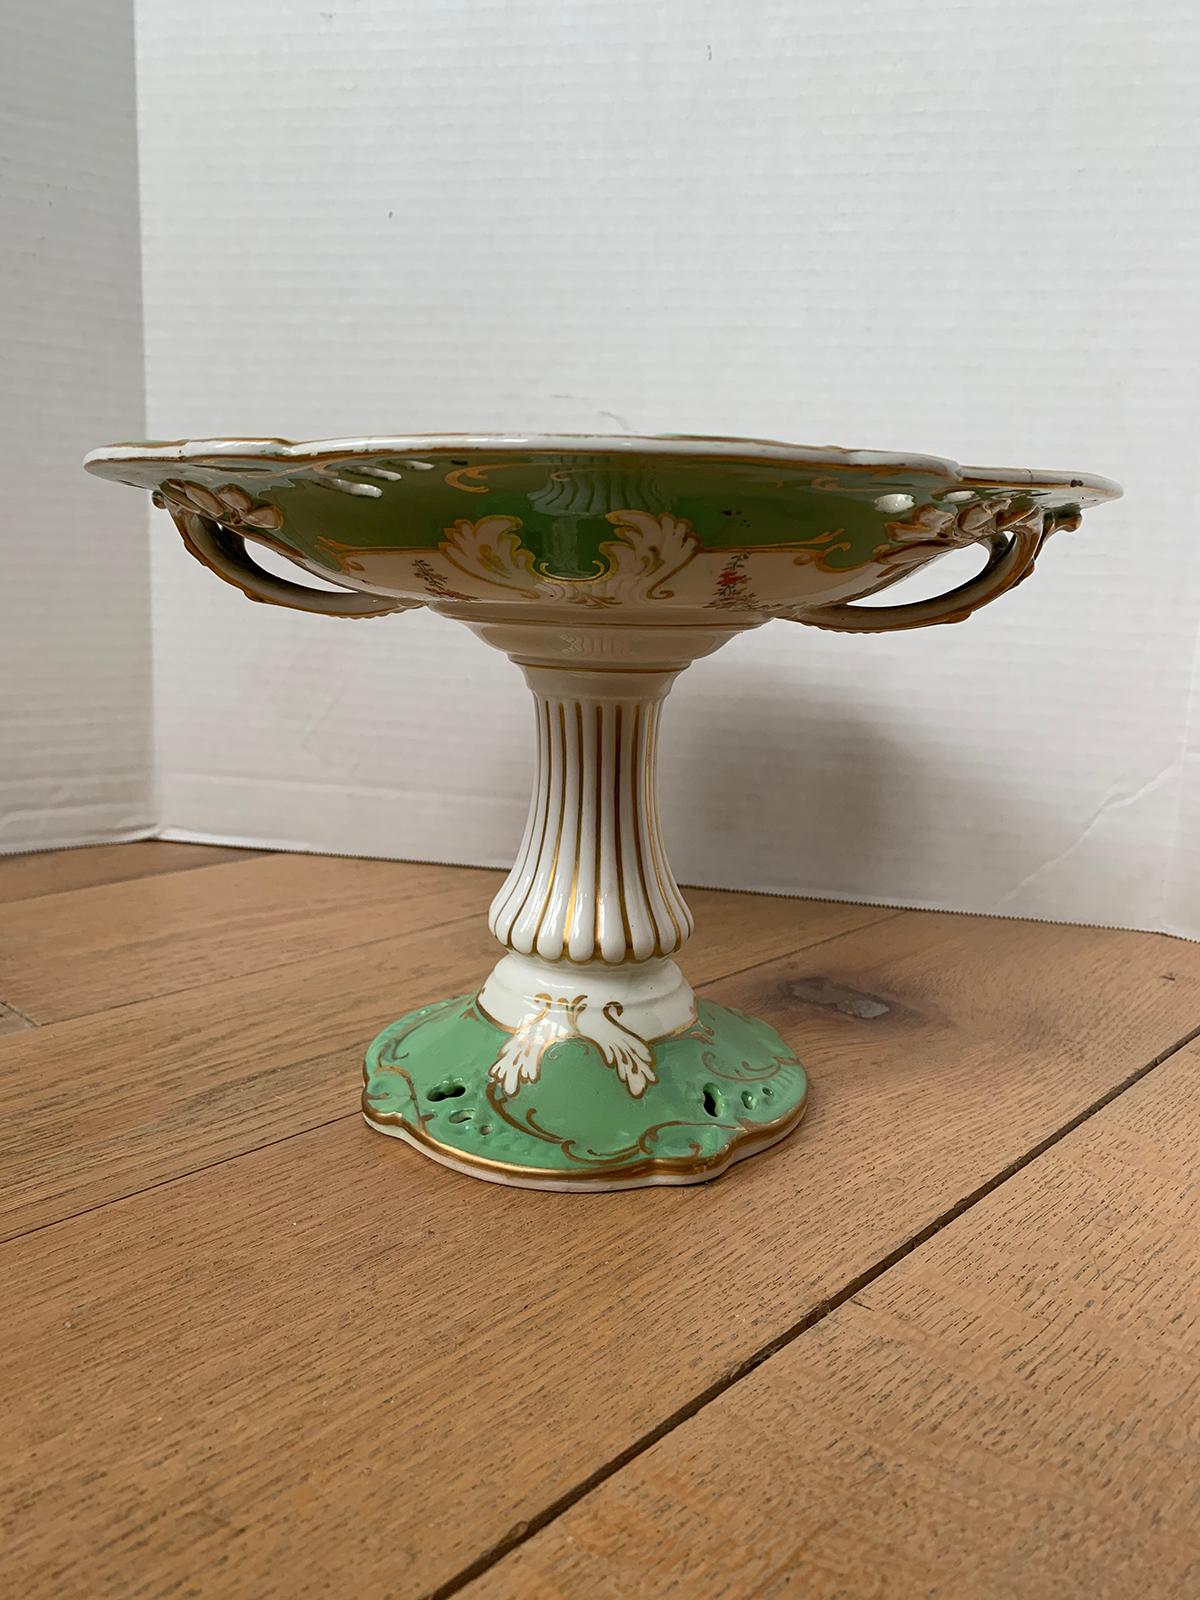 19th century English green and white porcelain compote with gilt details, unmarked.